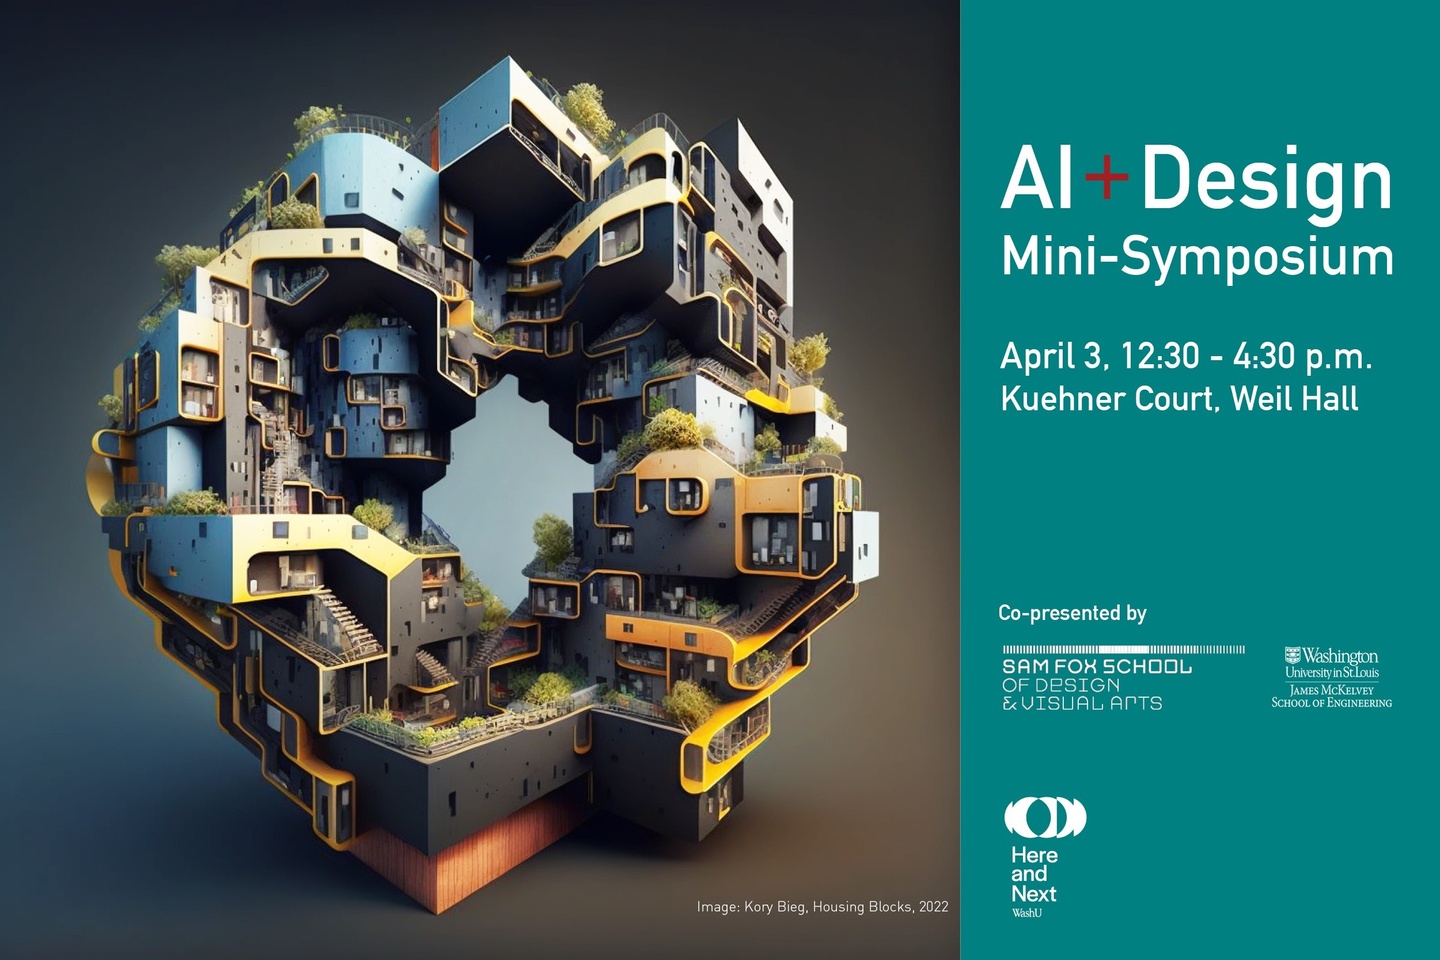 poster for AI + Design Mini-Symposium with image of housing blocks and text of event details